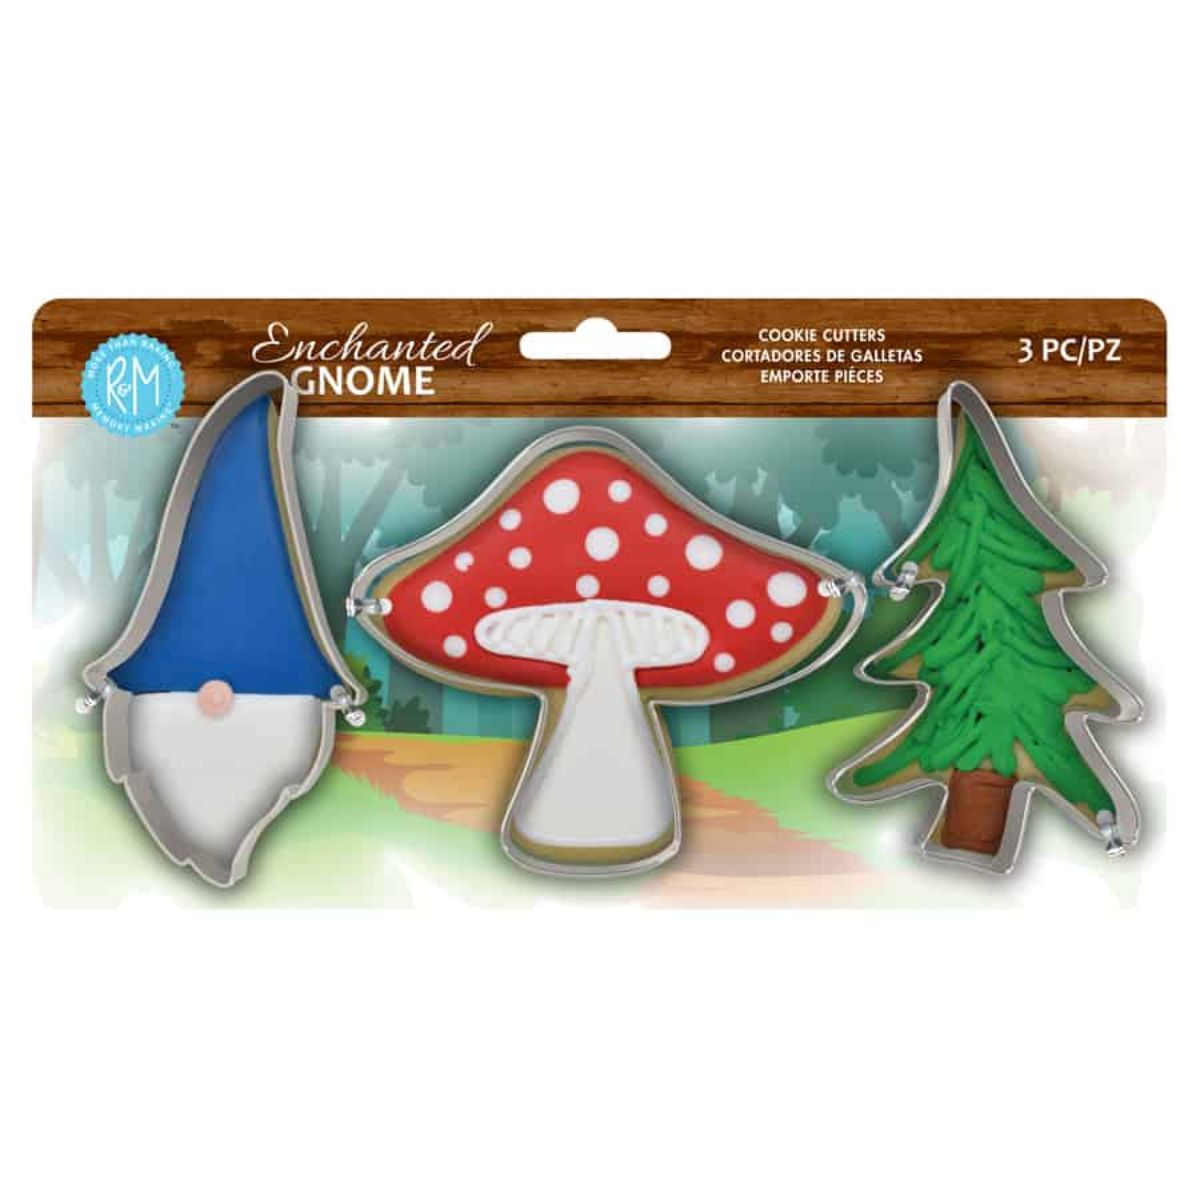 R&M Cookie Cutter Enchanted Gnome 3pc Set